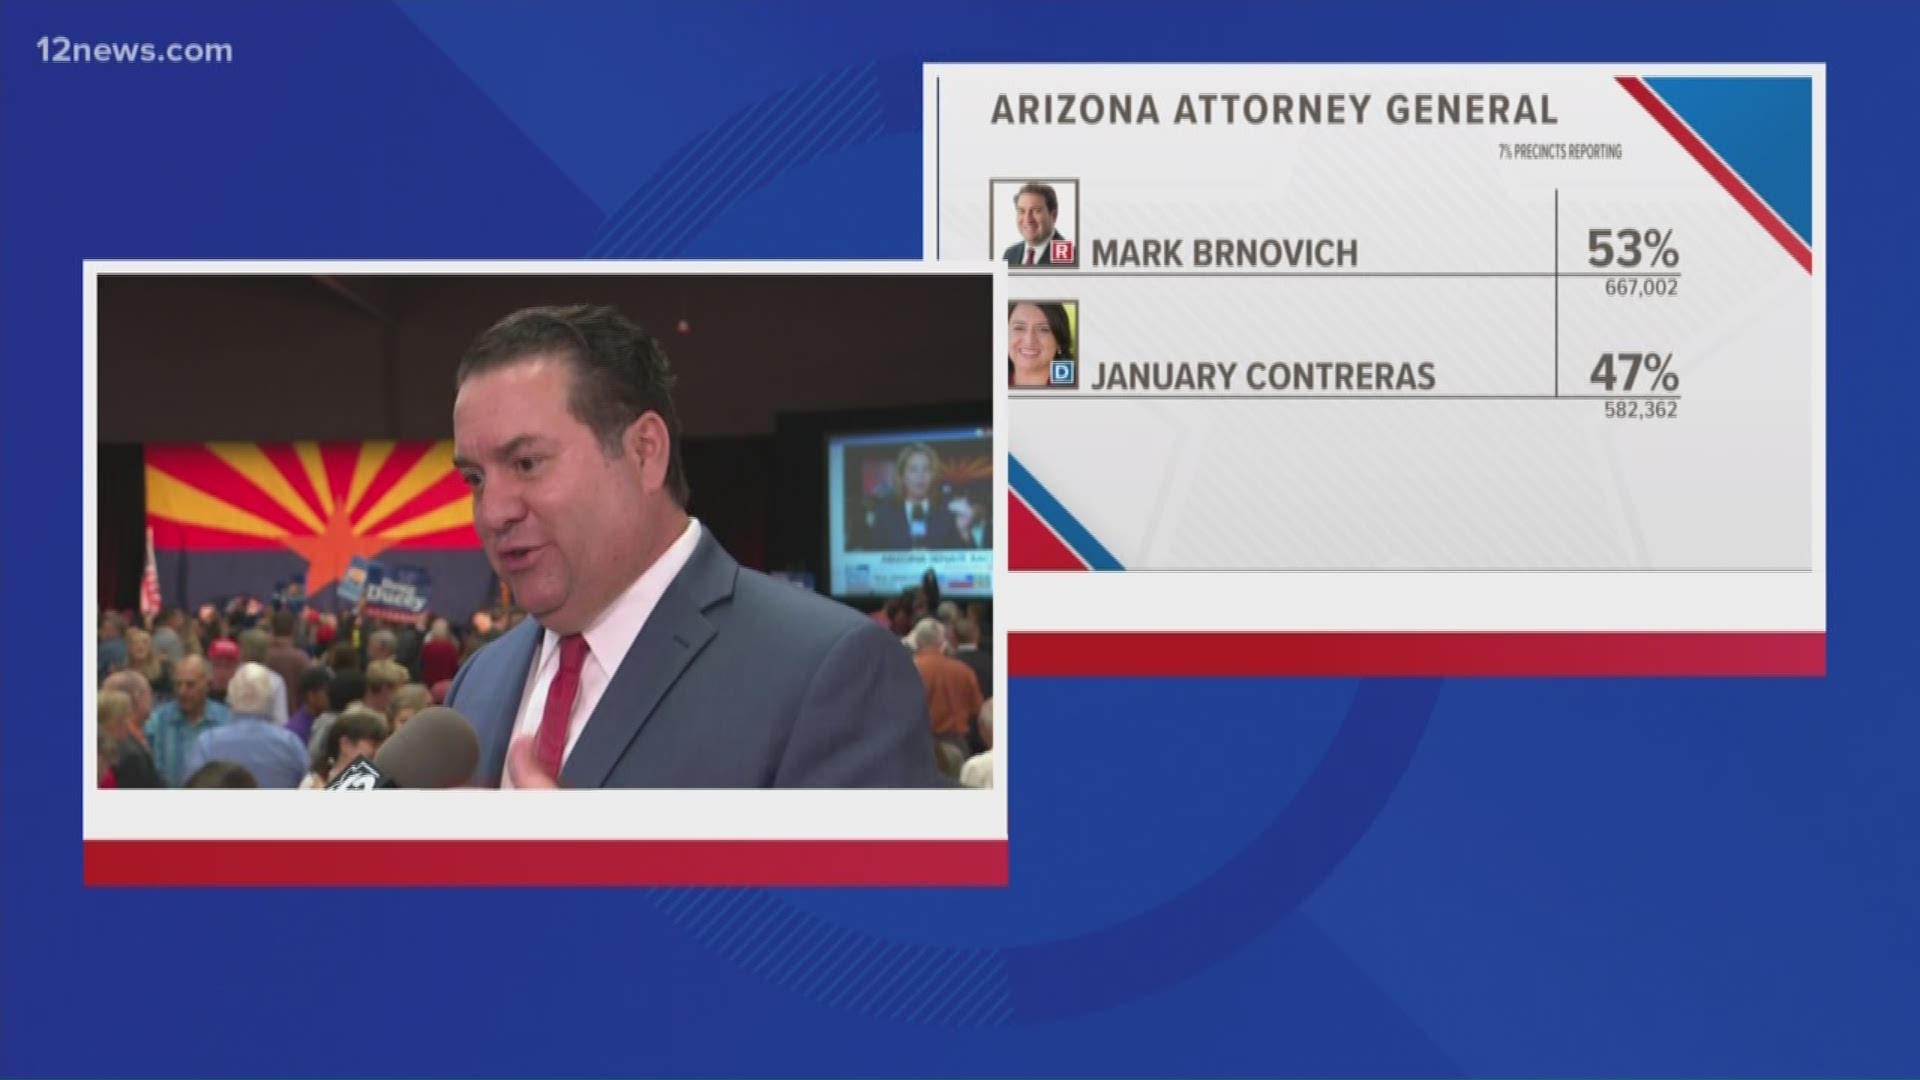 Ahead of the final results for AZ Attorney General, current Attorney General Mark Brnovich talks to 12 News about his campaign and what he will do if he is re-elected.